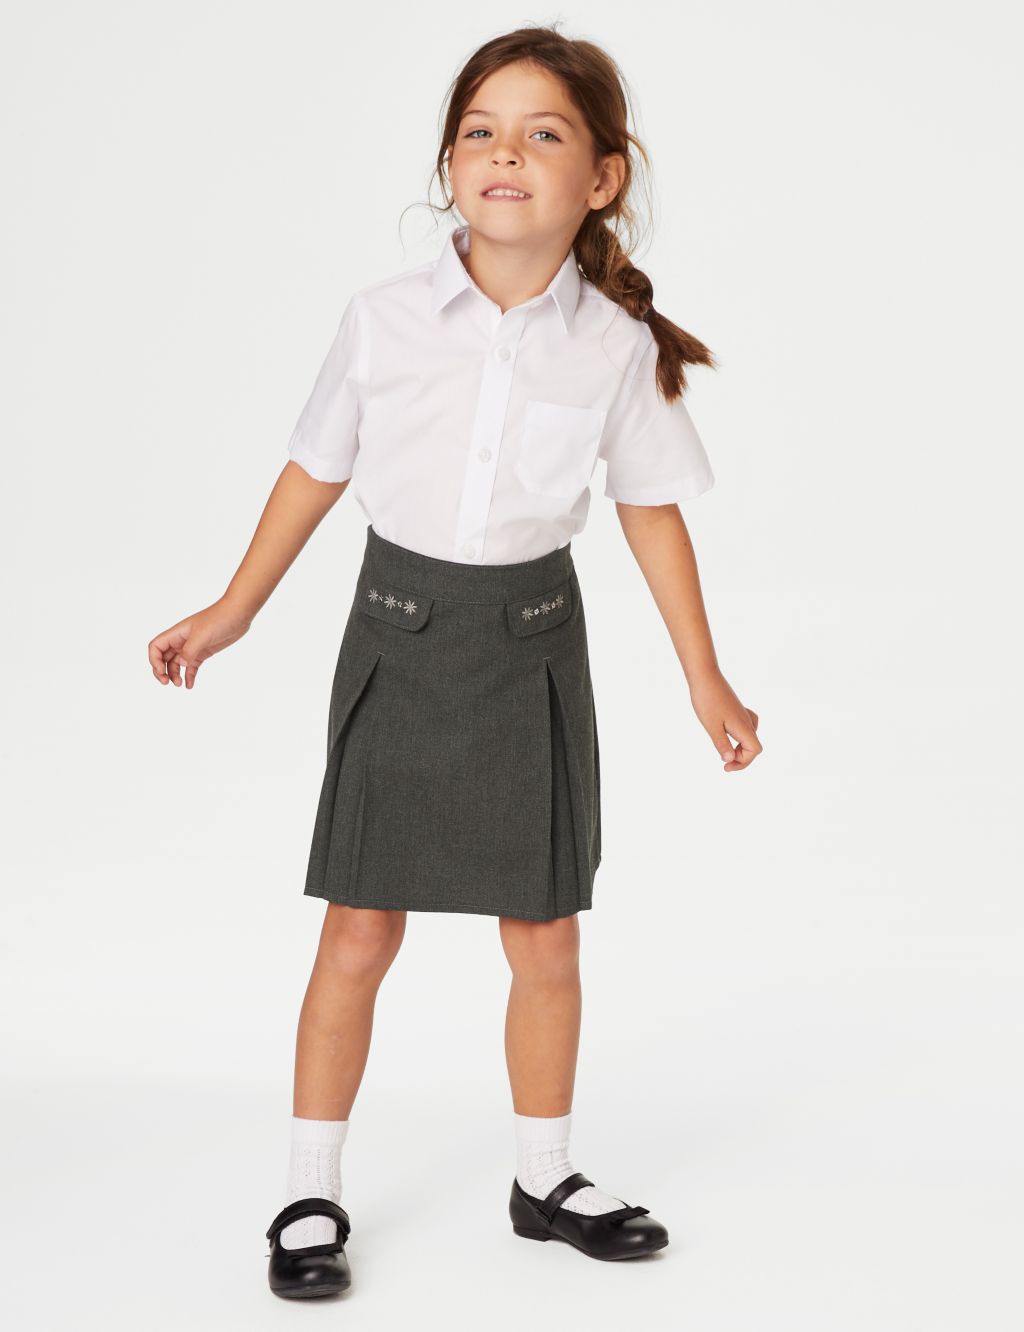 2pk Girls' Embroidered School Skirts (2-18 Yrs) image 2